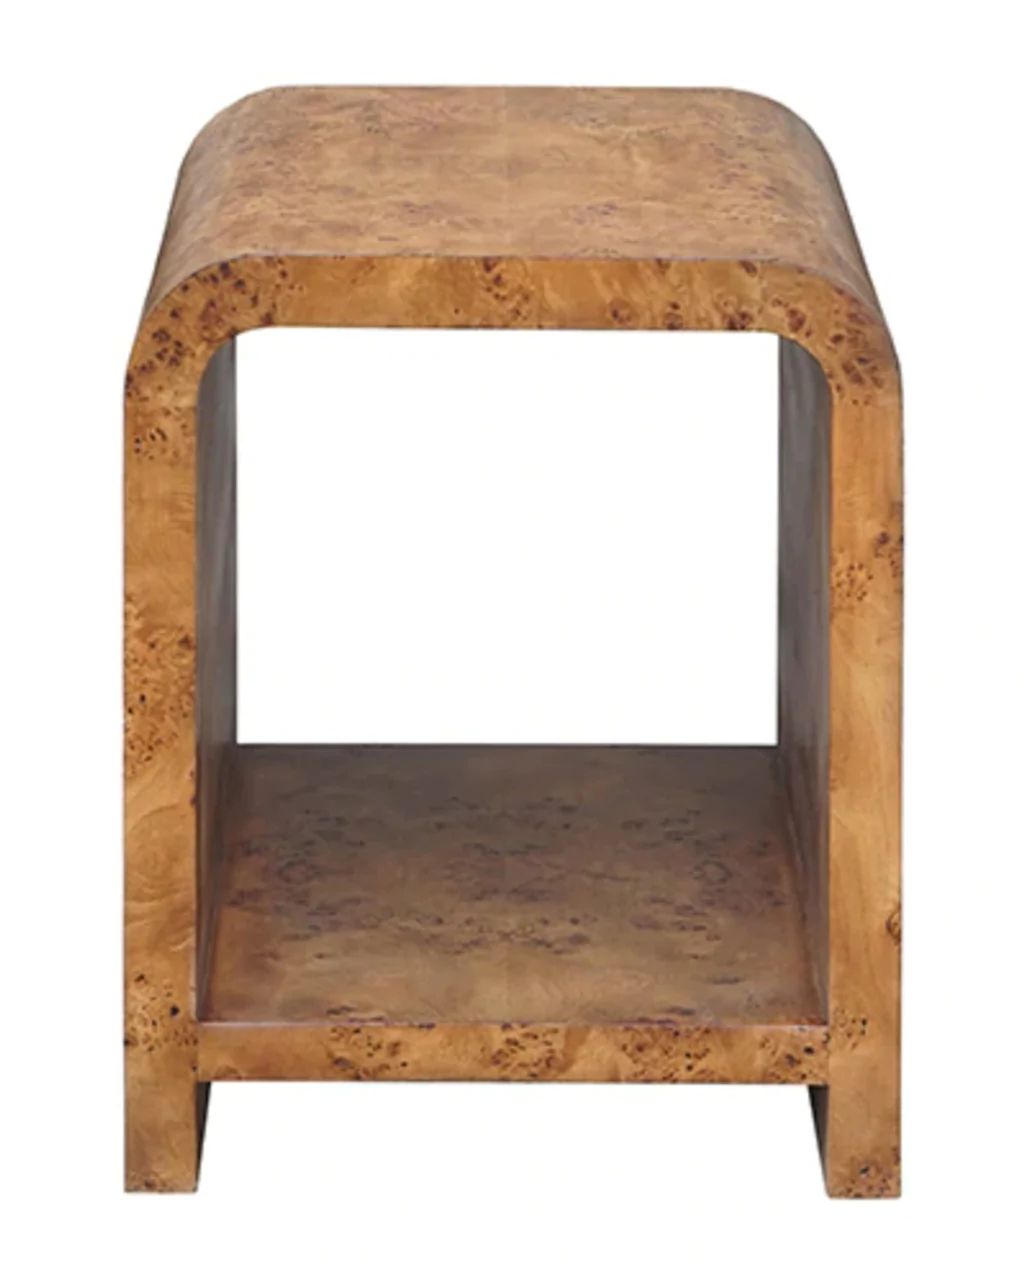 Mardel Side Table | McGee & Co.